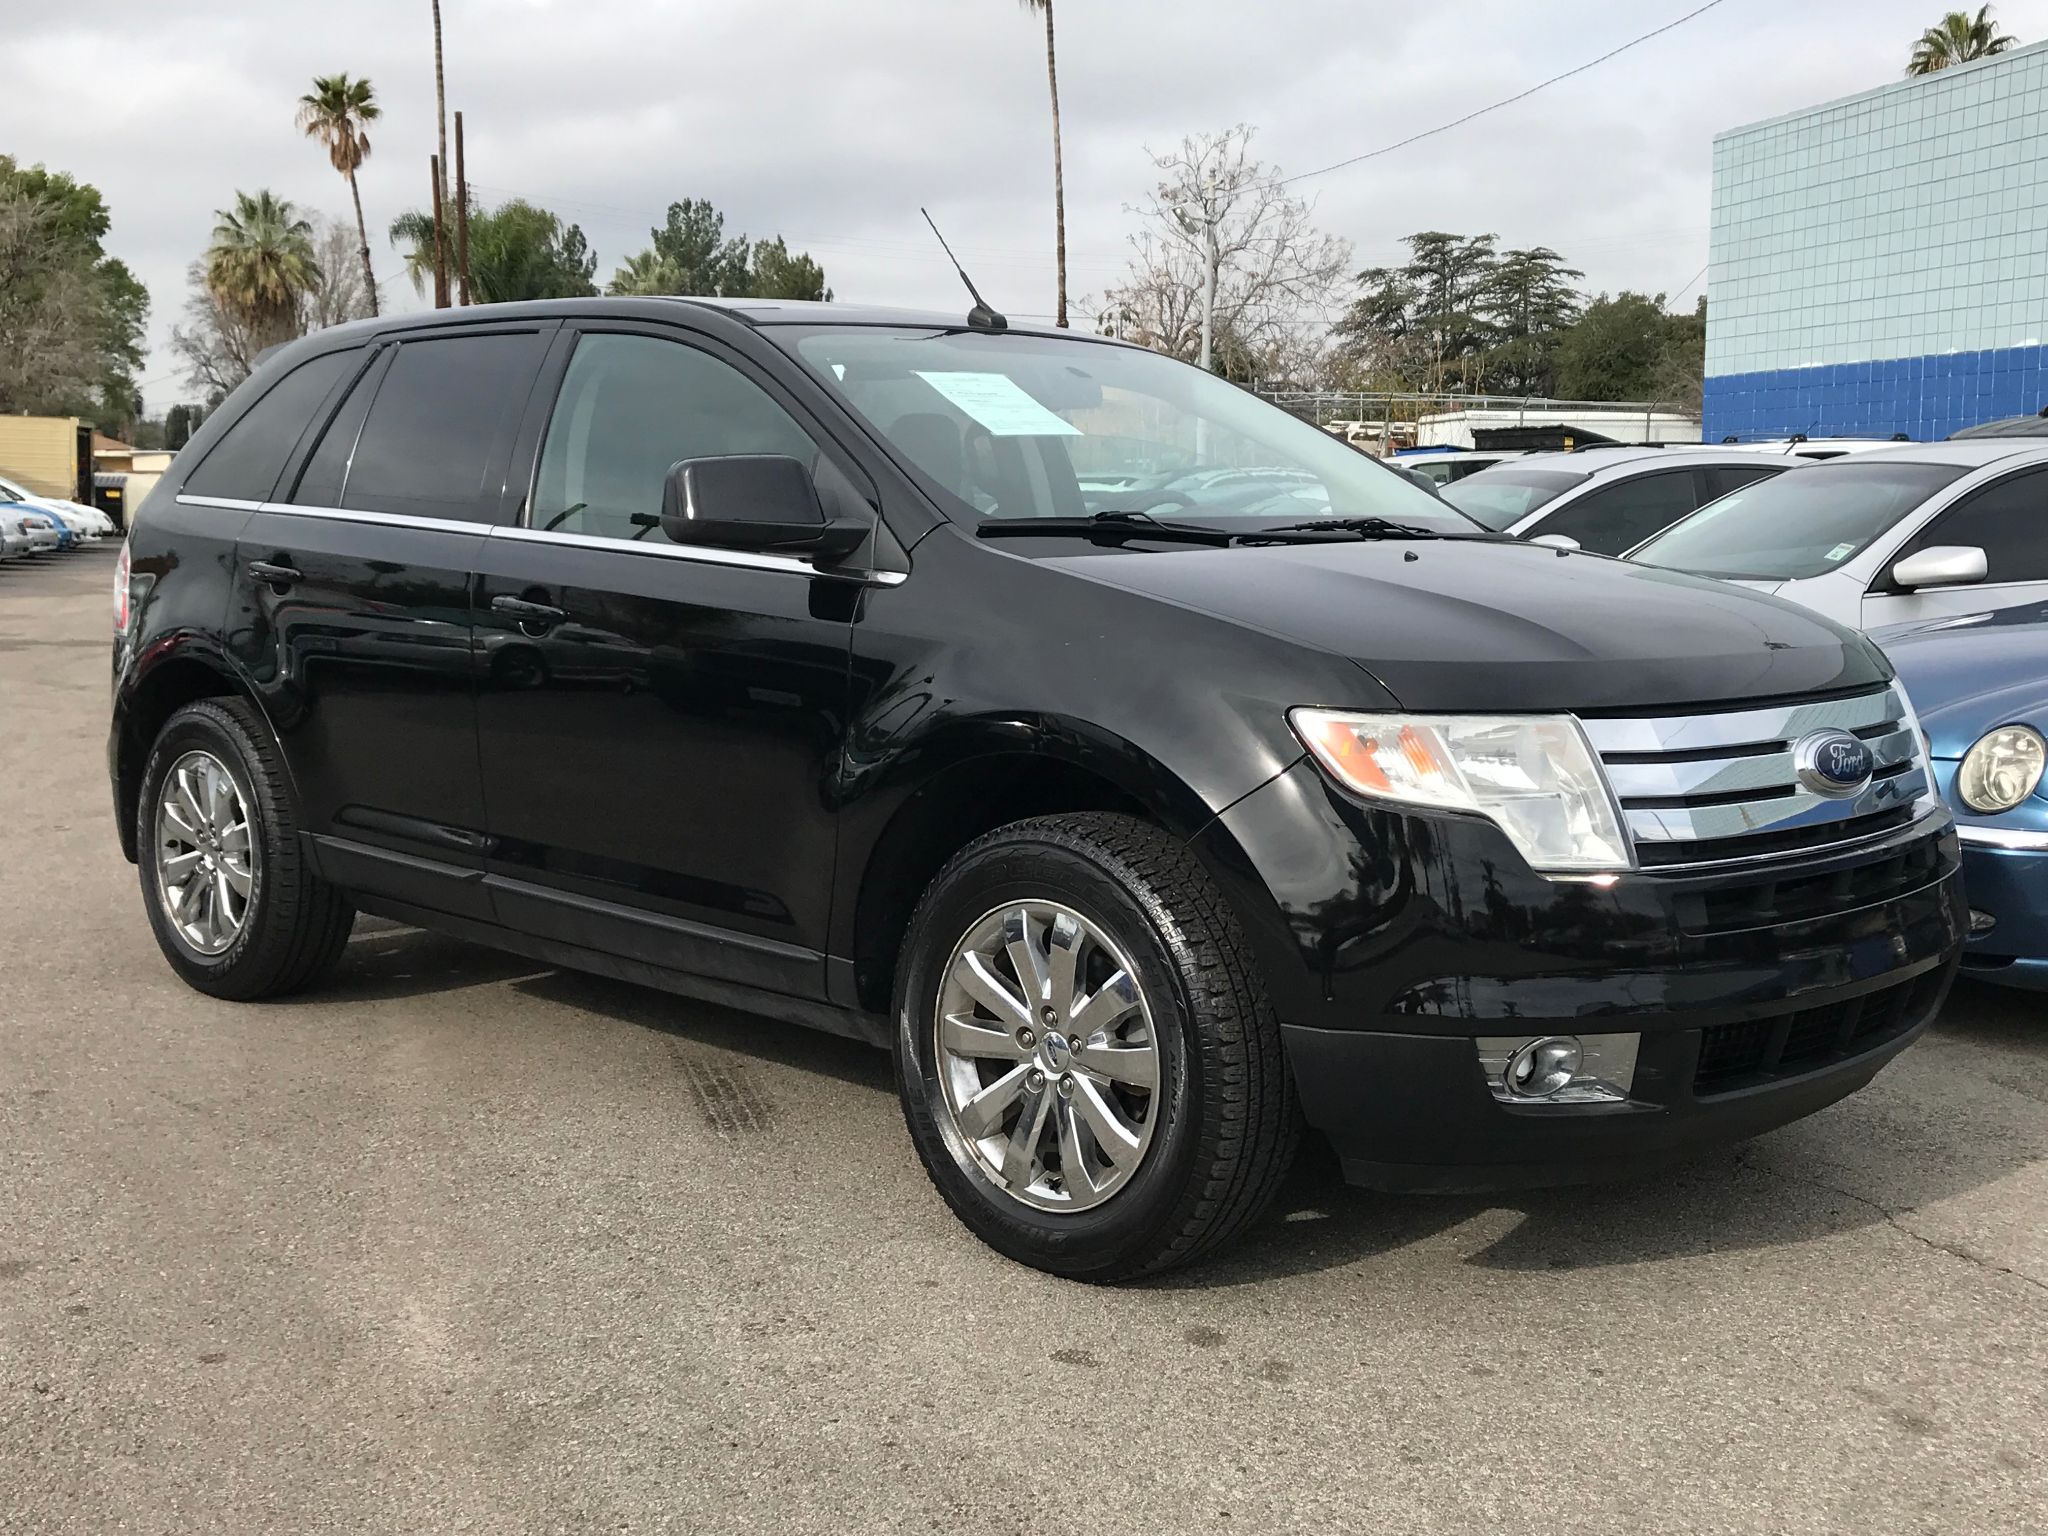 Used 2008 Ford Edge Limited at City Cars Warehouse INC